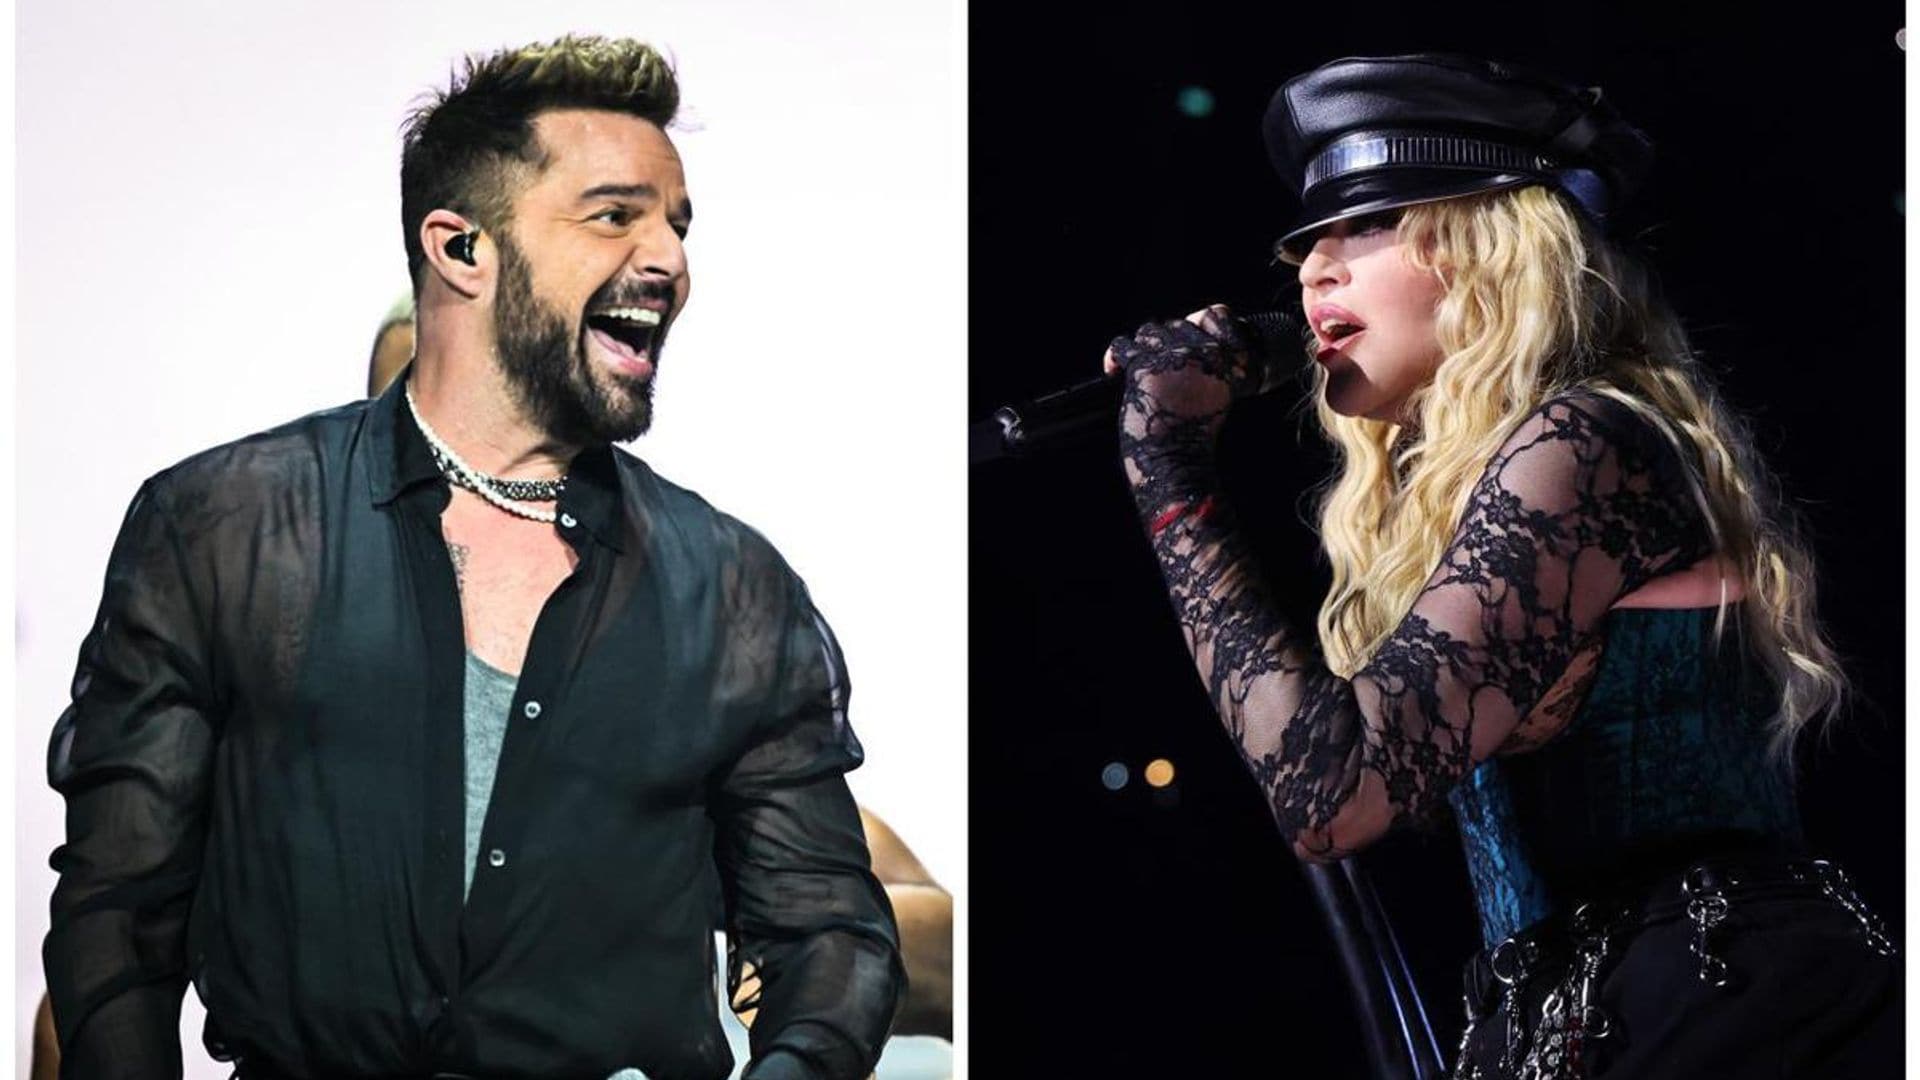 Ricky Martin let loose at Madonna’s over-the-top celebration tour